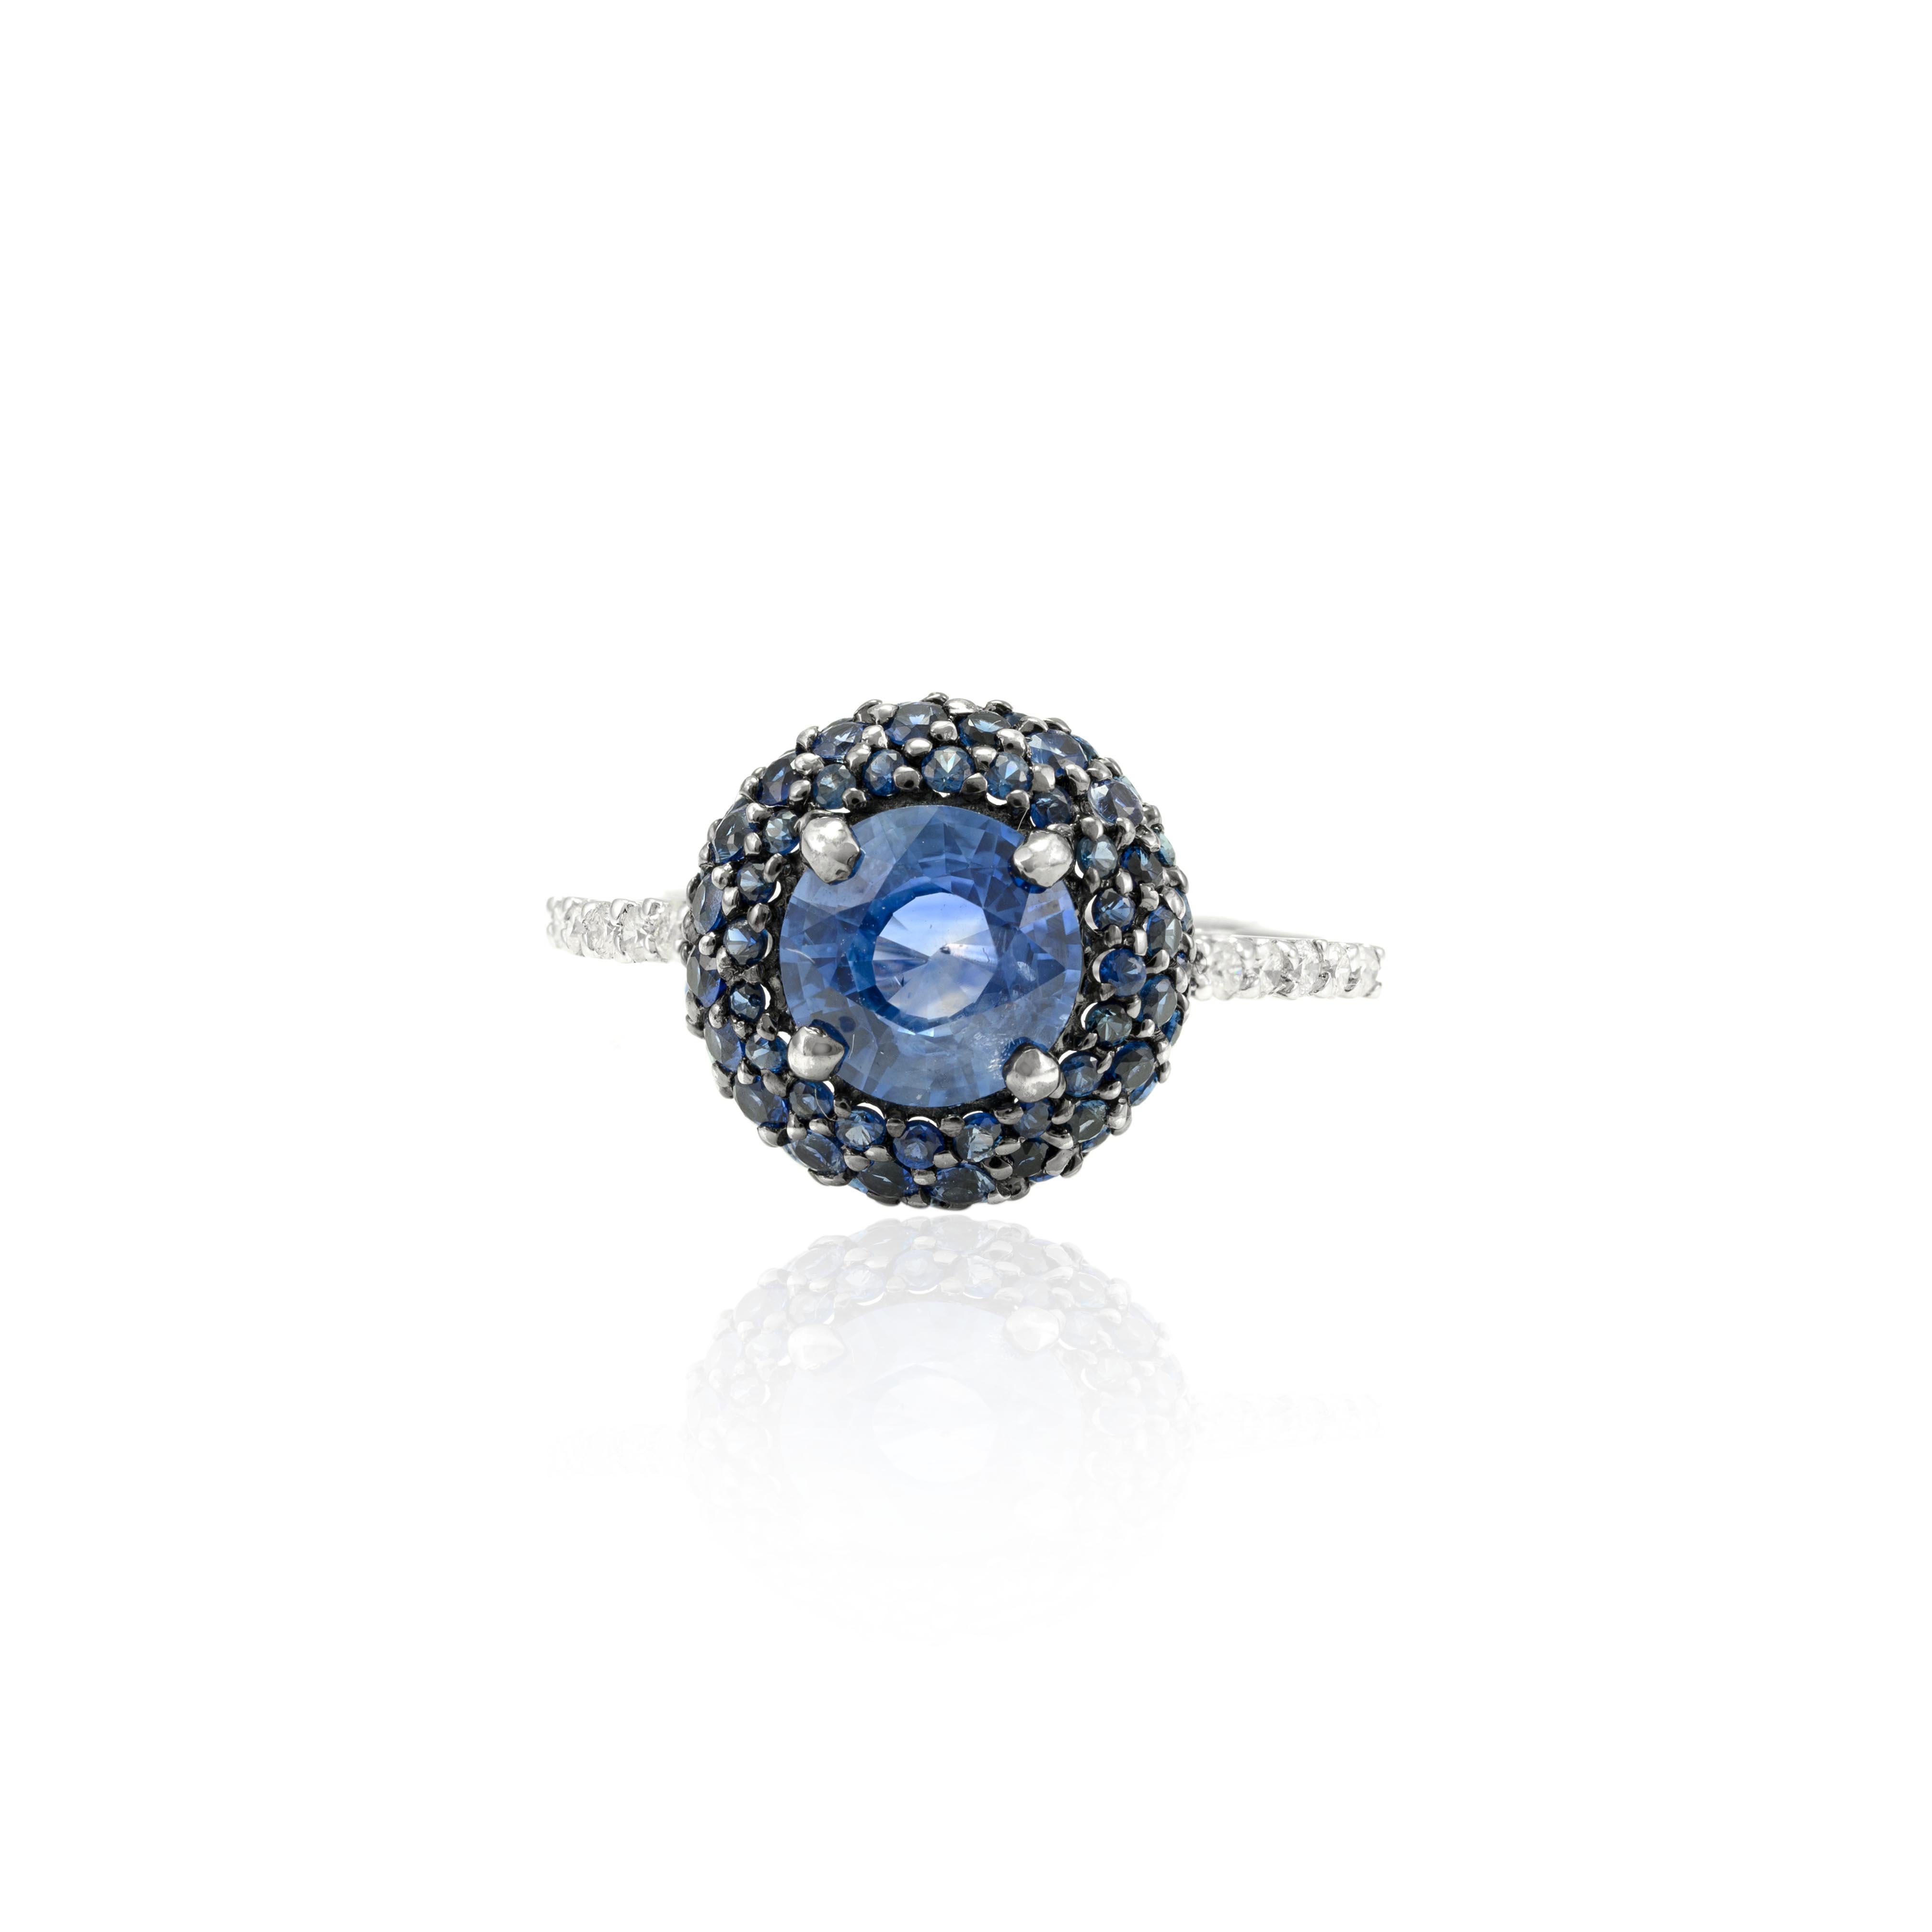 For Sale:  2.58 Ct Round Pave Blue Sapphire Ring in 18k Solid White Gold with Diamonds 4